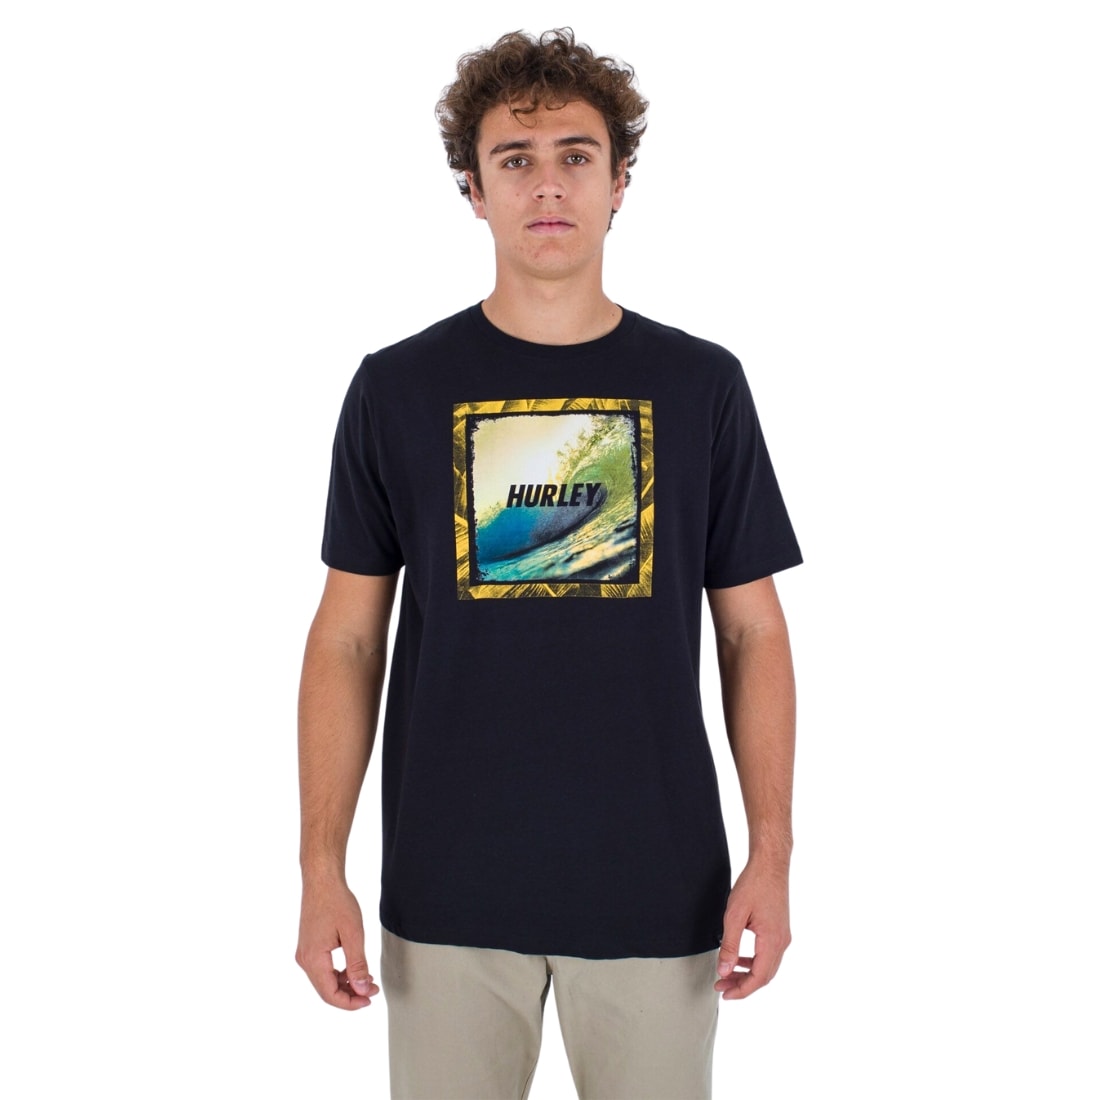 Hurley Everyday Wave Hello T-Shirt - Black - Mens Surf Brand T-Shirt by Hurley